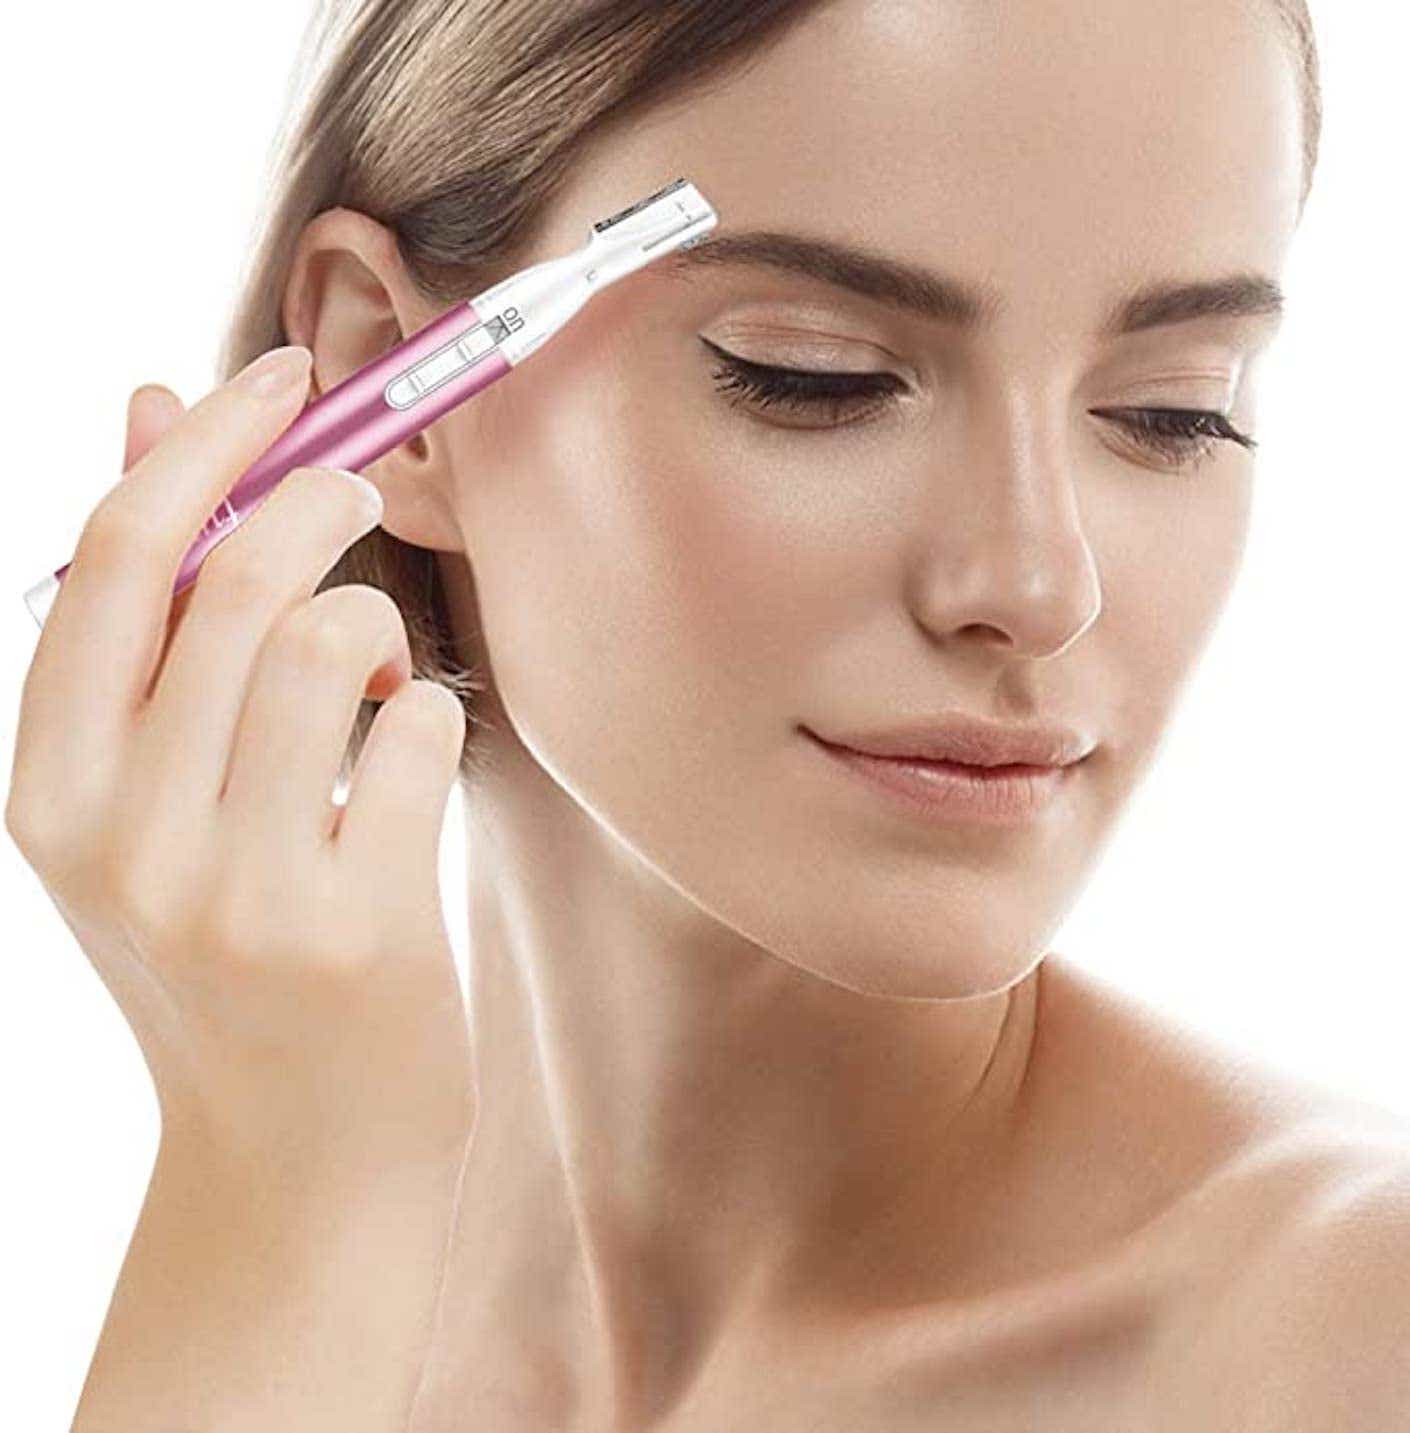 A woman holds an electric eyebrow trimmer up to her face.